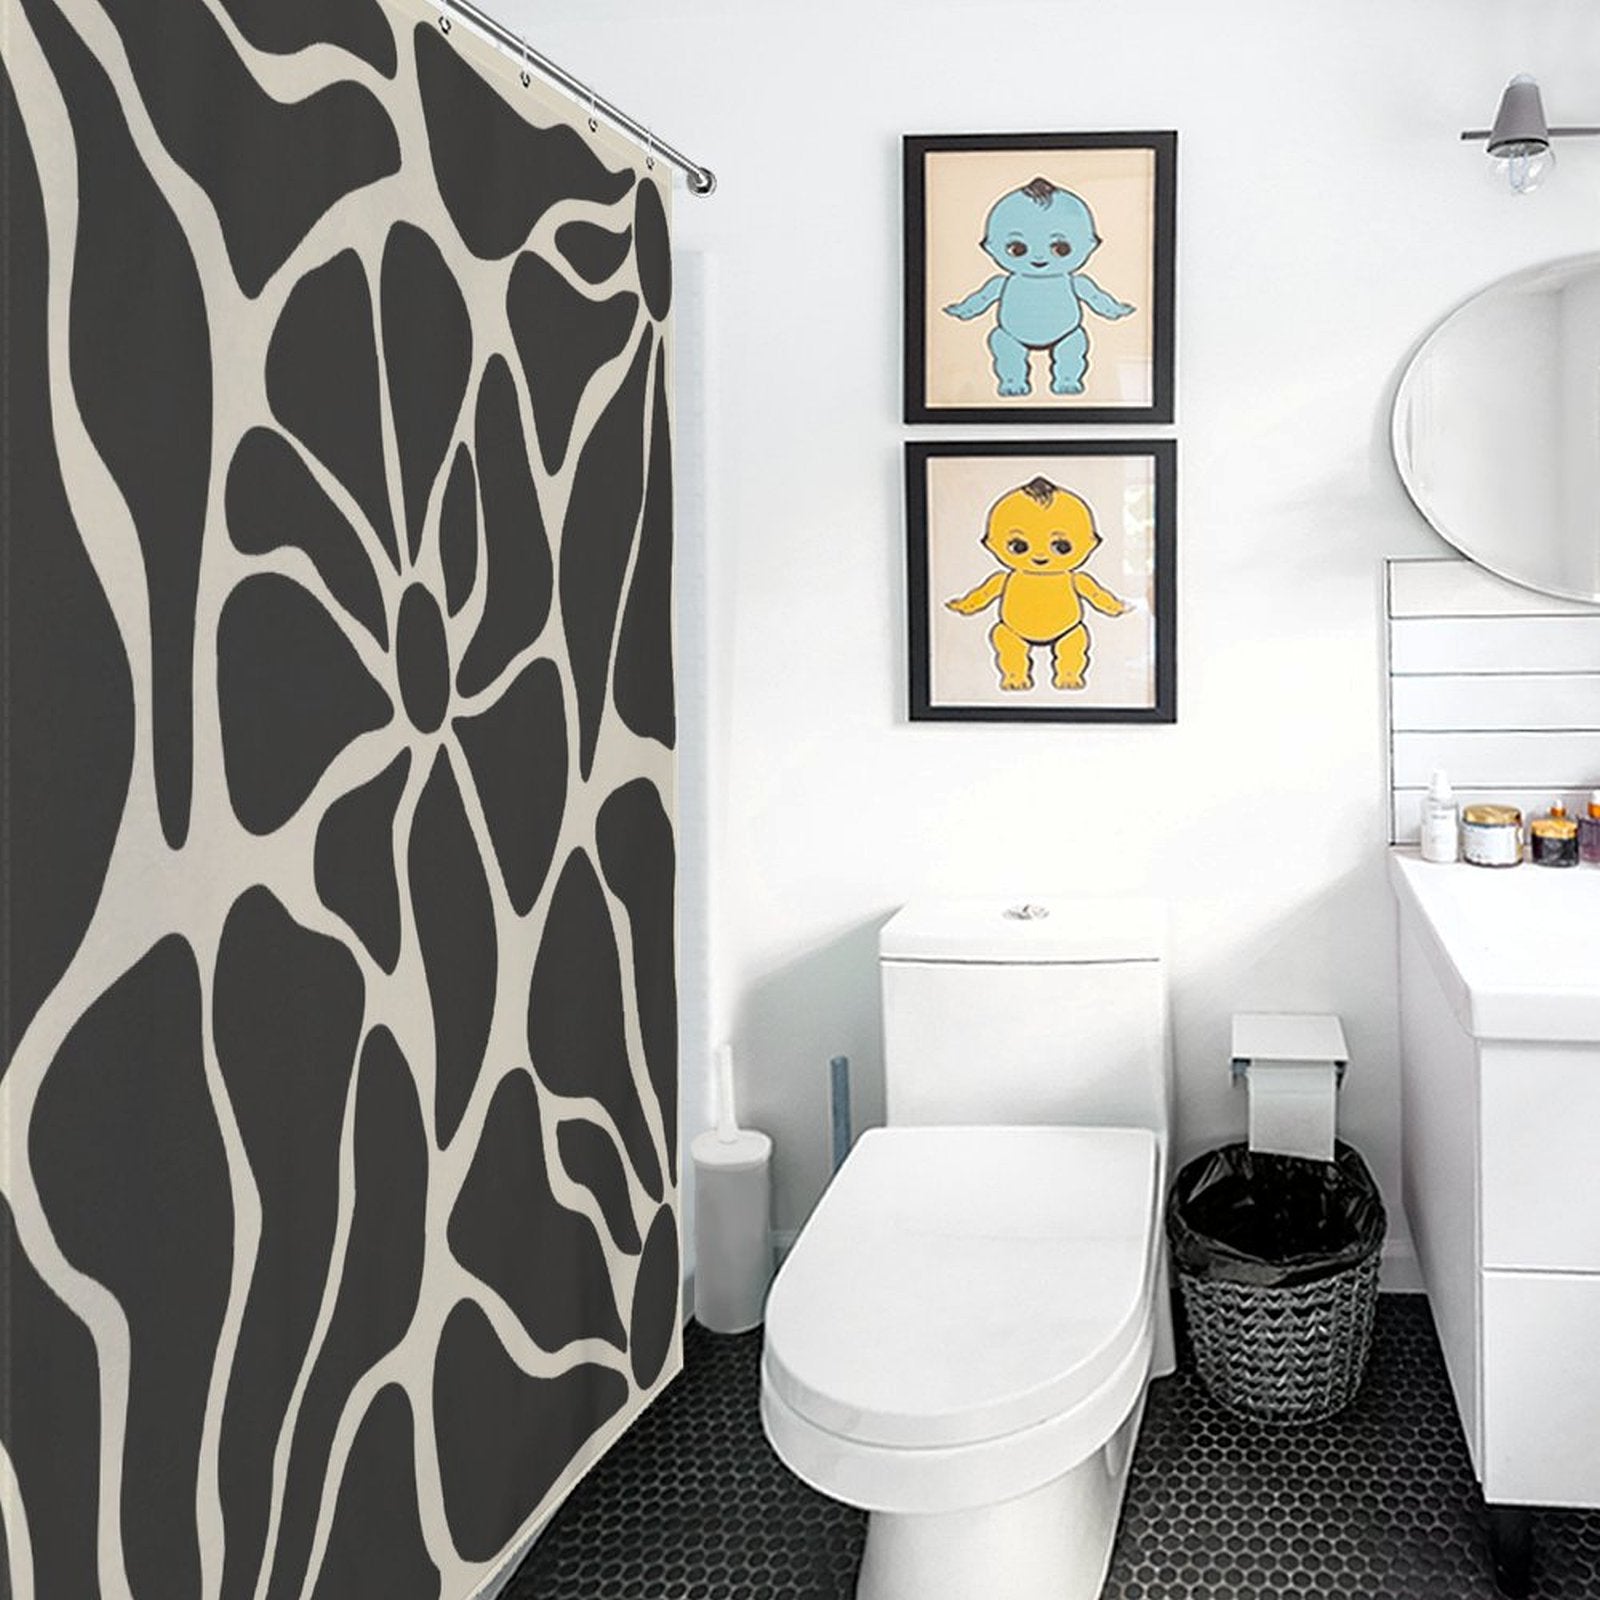 A bathroom with a Vintage Boho Flower Black and Grey Art 70s Black Floral Mid Century Abstract Shower Curtain-Cottoncat, white toilet, sink, and wastebasket. Two framed illustrations of anthropomorphic characters hang on the wall above the toilet.